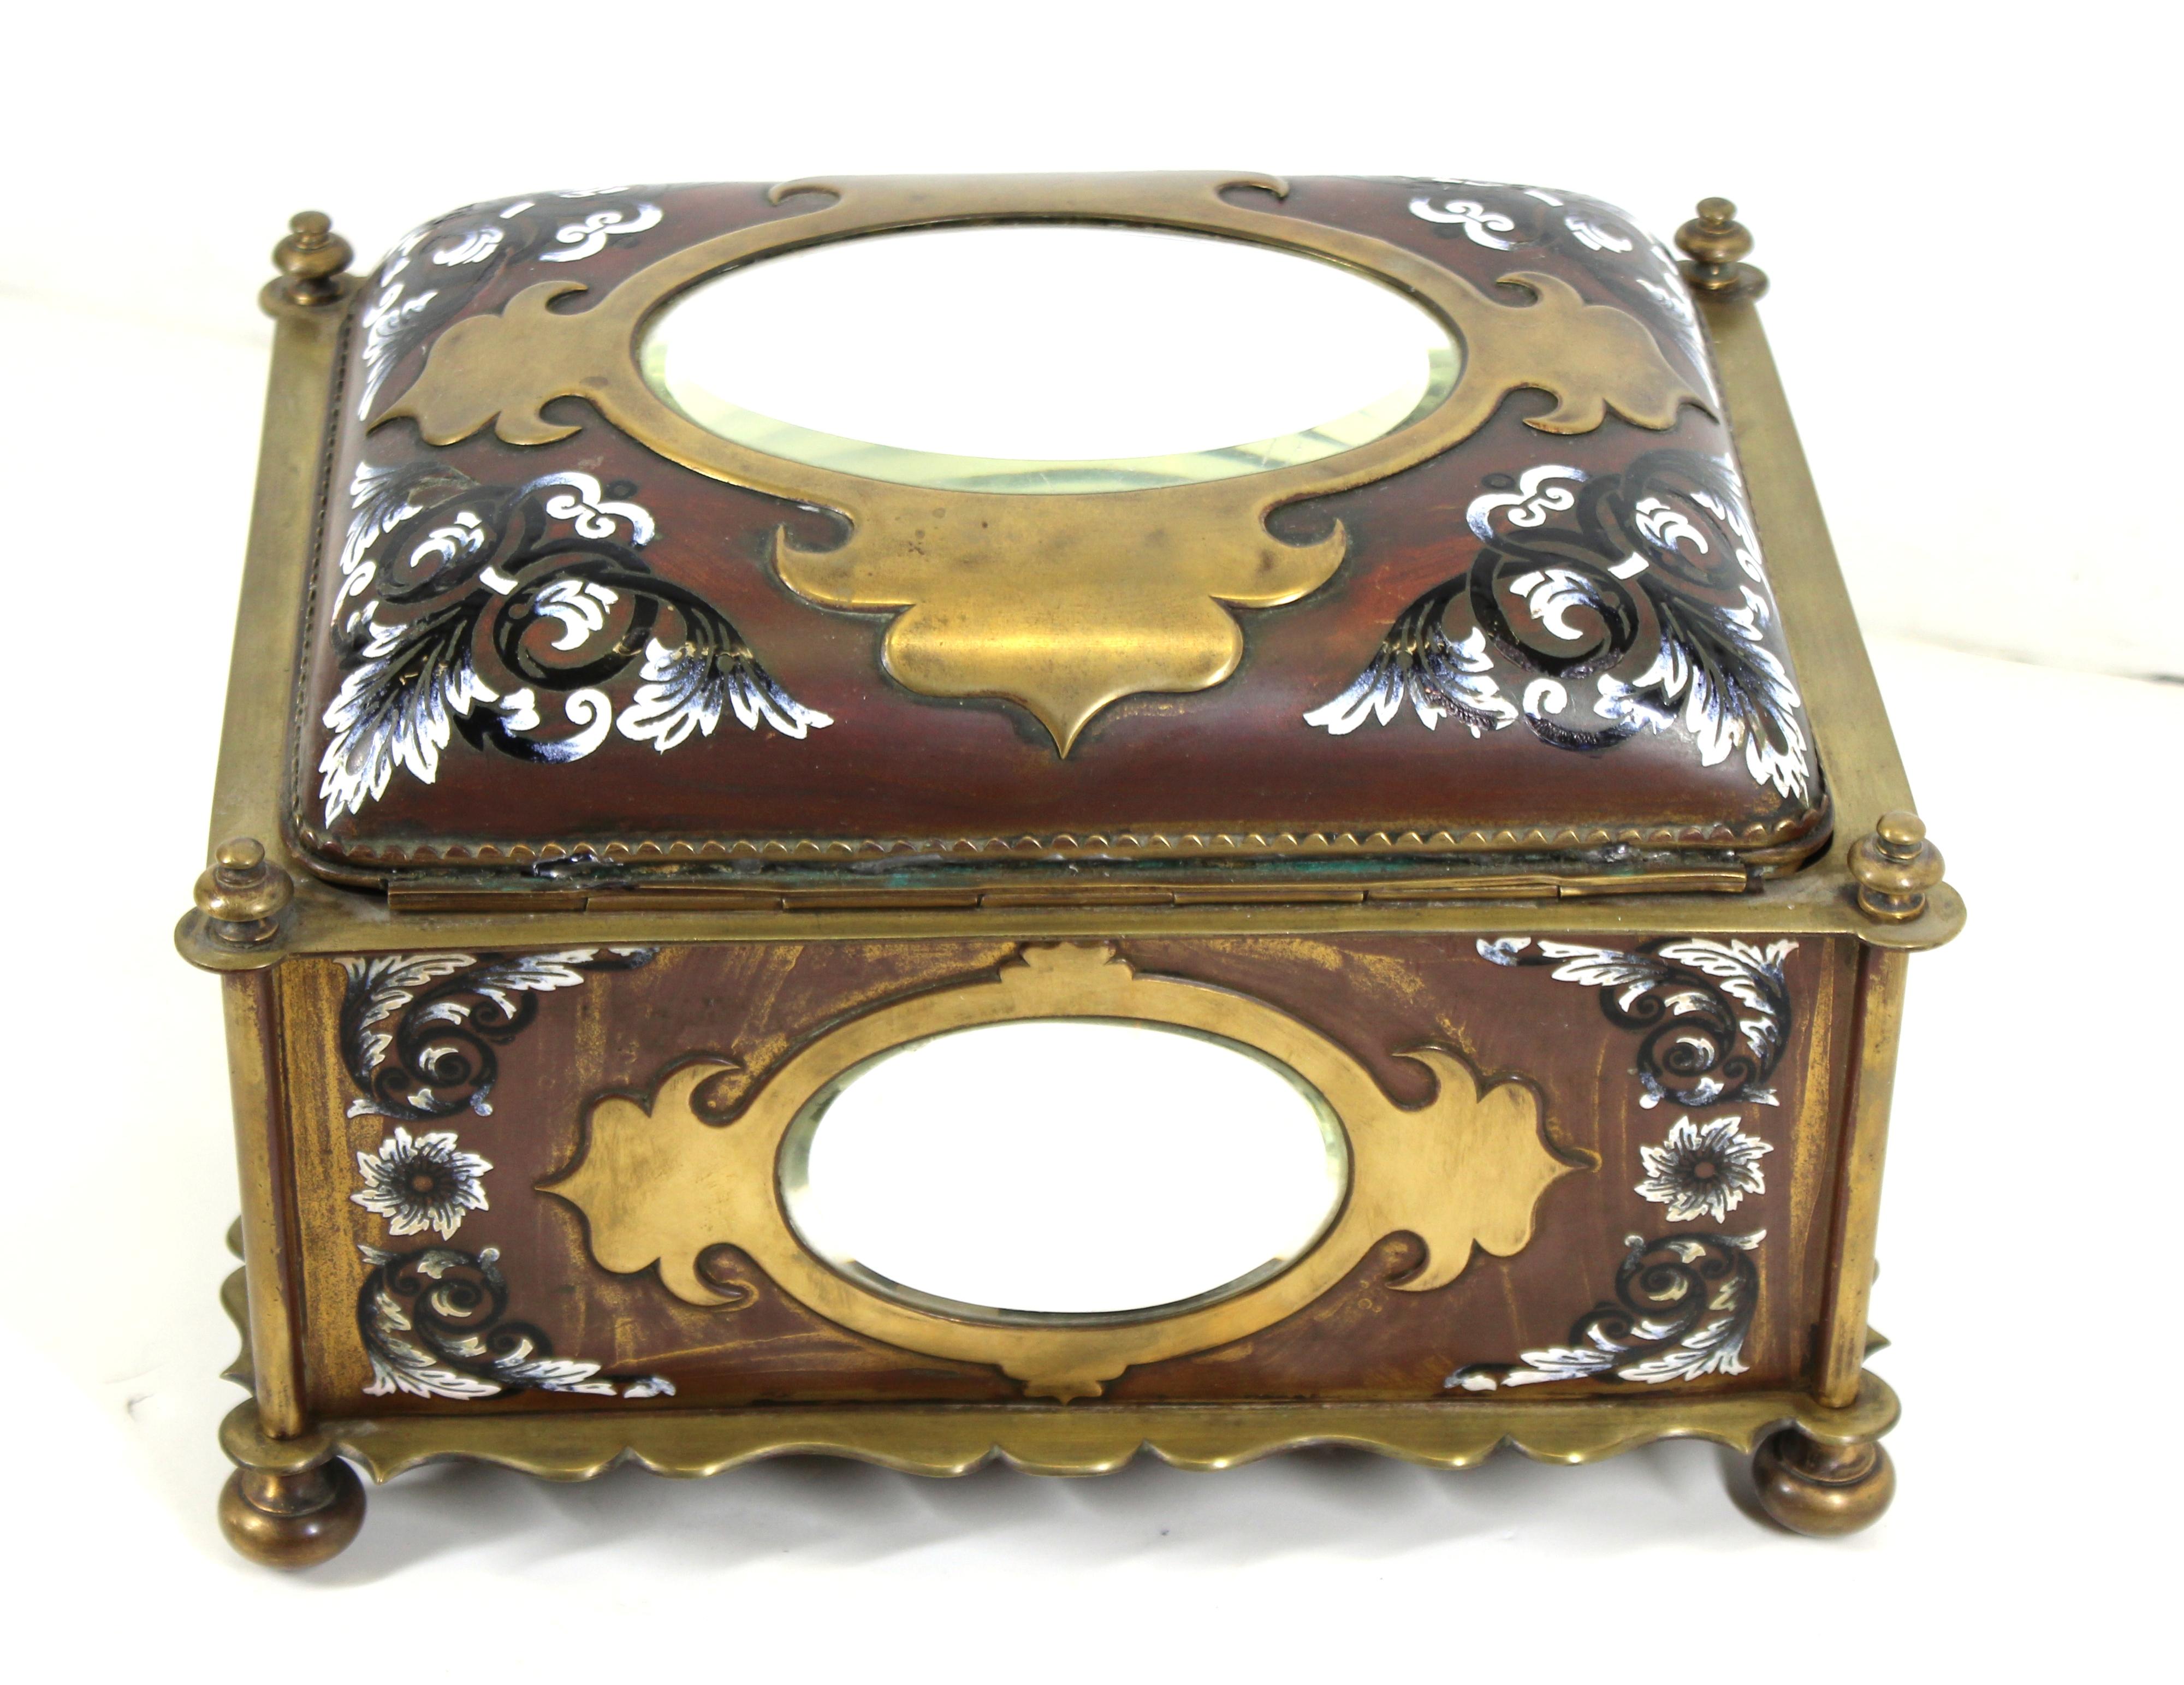 French Renaissance Revival Champleve Enamel Jewelry Box with Oval Mirror Inserts For Sale 2